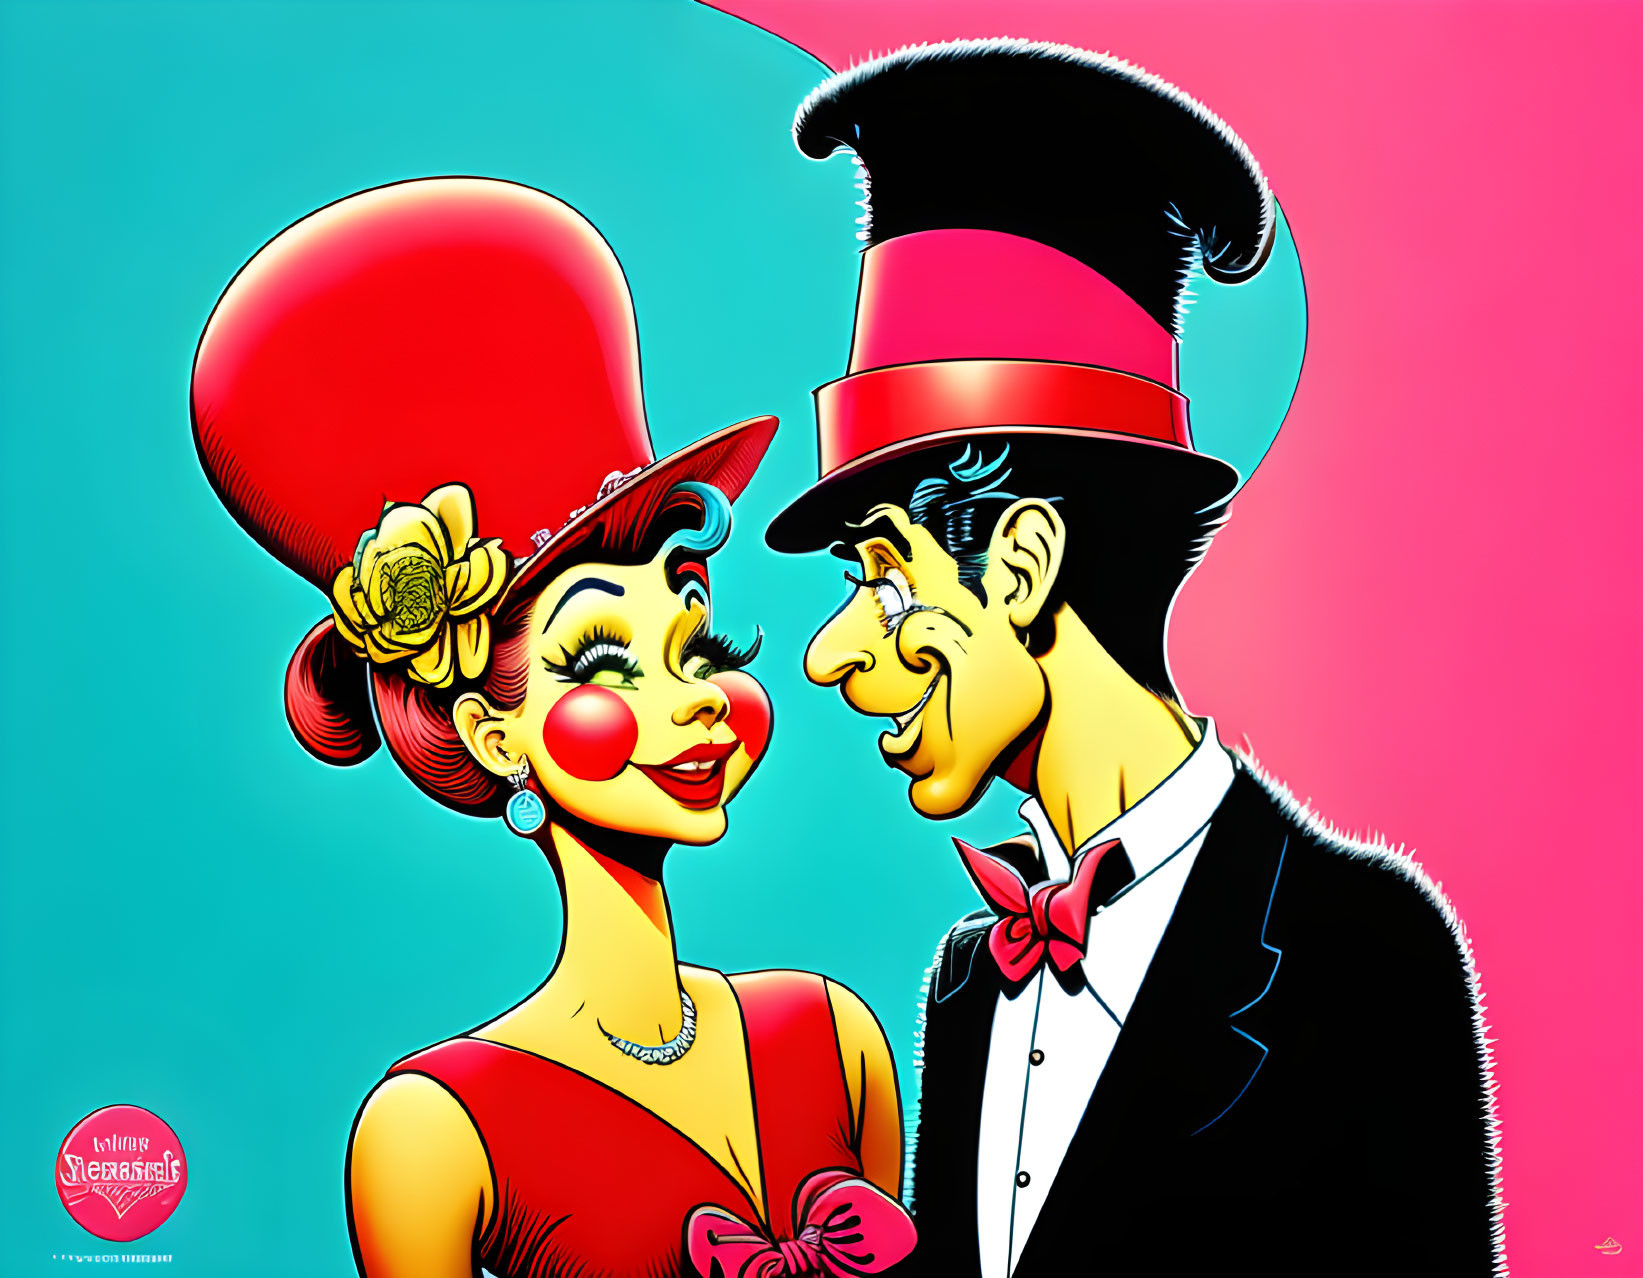 Vintage animated couple in elegant attire with oversized red top hats on split pink and turquoise background